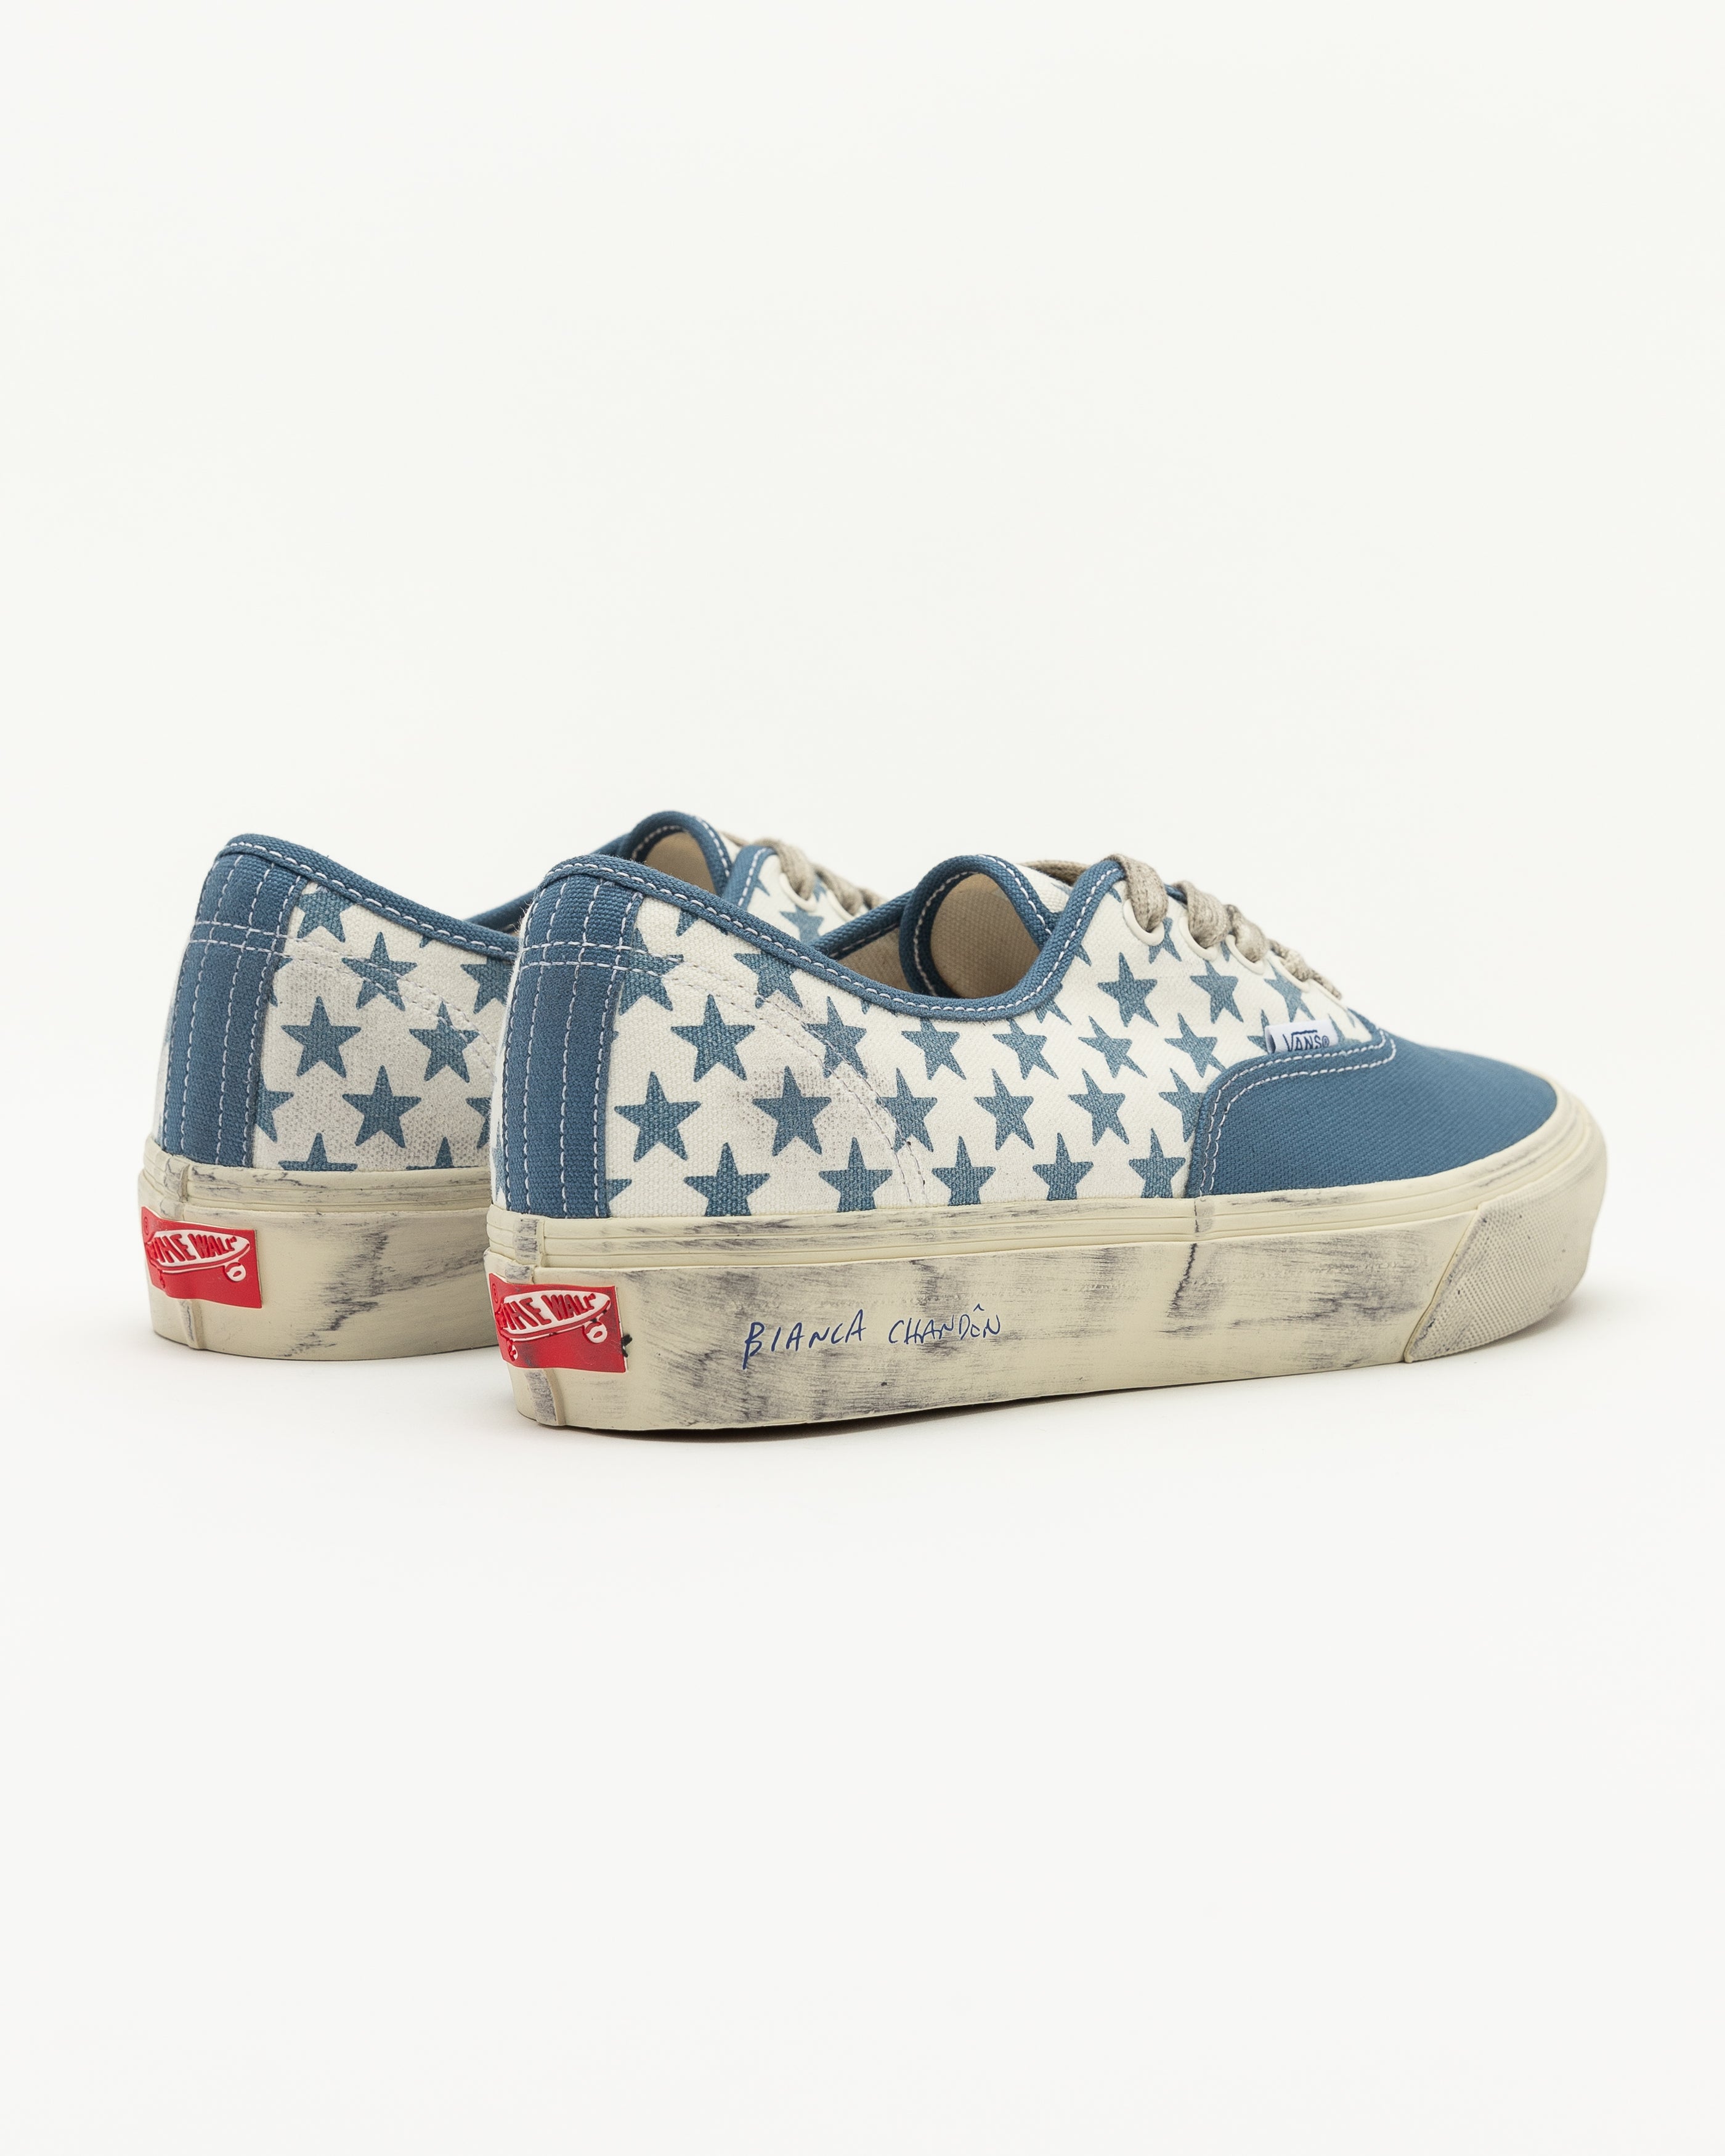 UA Authentic VLT LX BIANCA CHANDON in Navy and White